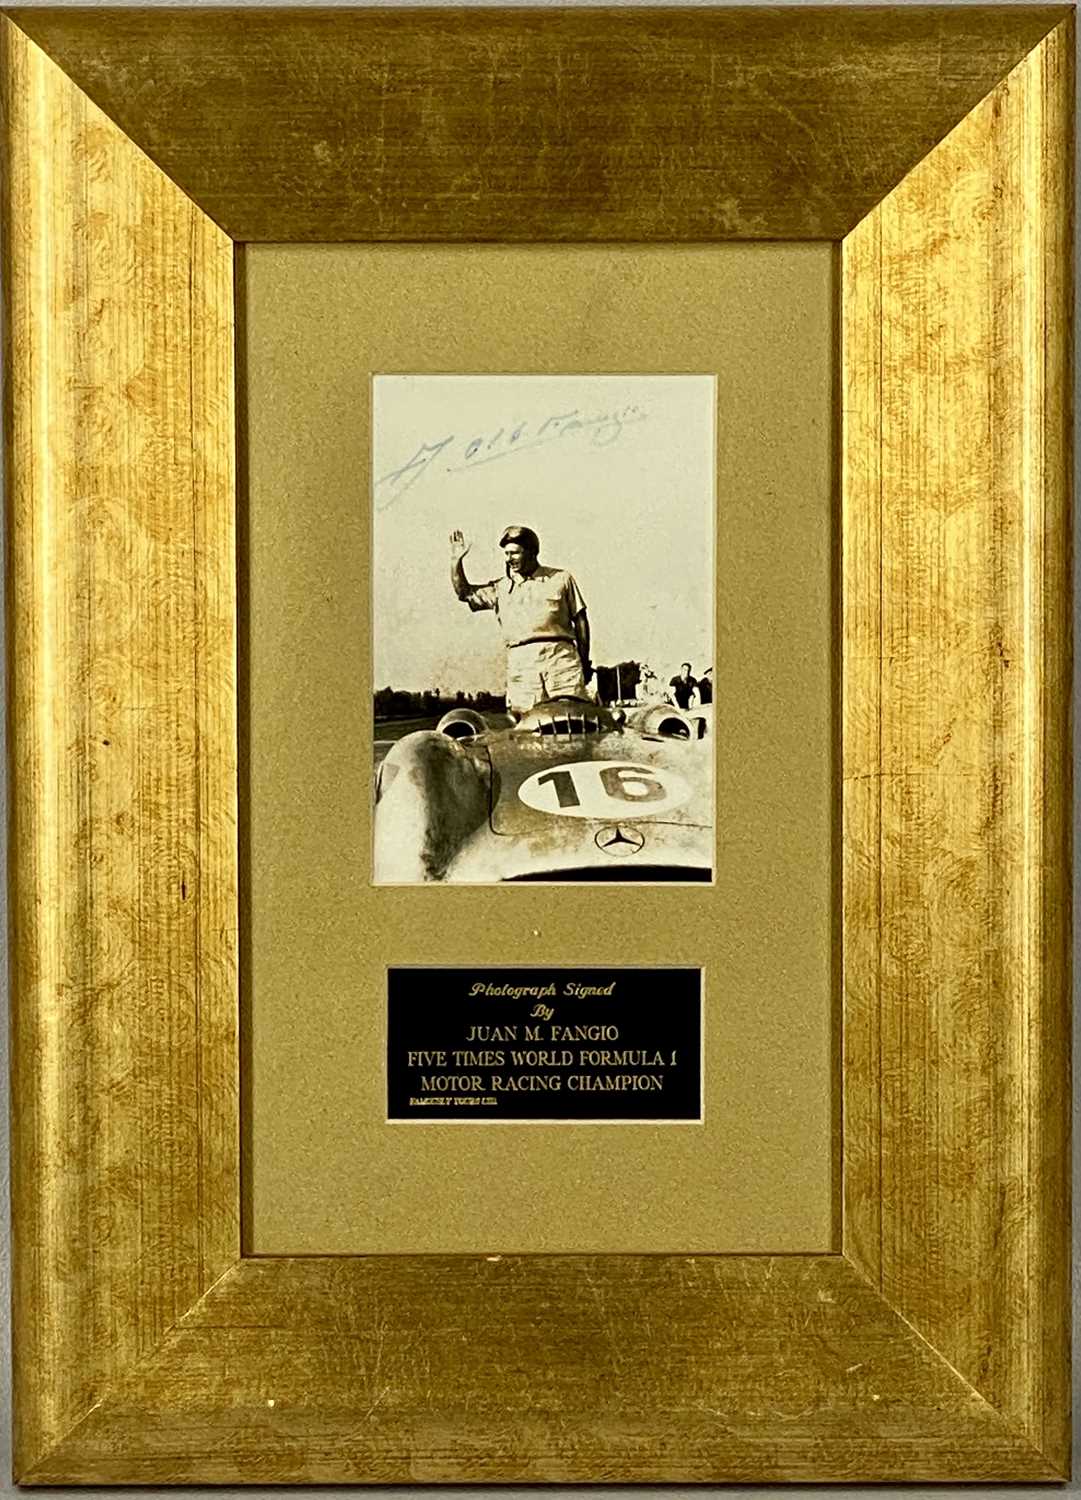 BLACK AND WHITE PHOTOGRAPH - JUAN M. FANGIO in Mercedes Benz racing car, signed in pen, 14 x 9. - Image 2 of 3